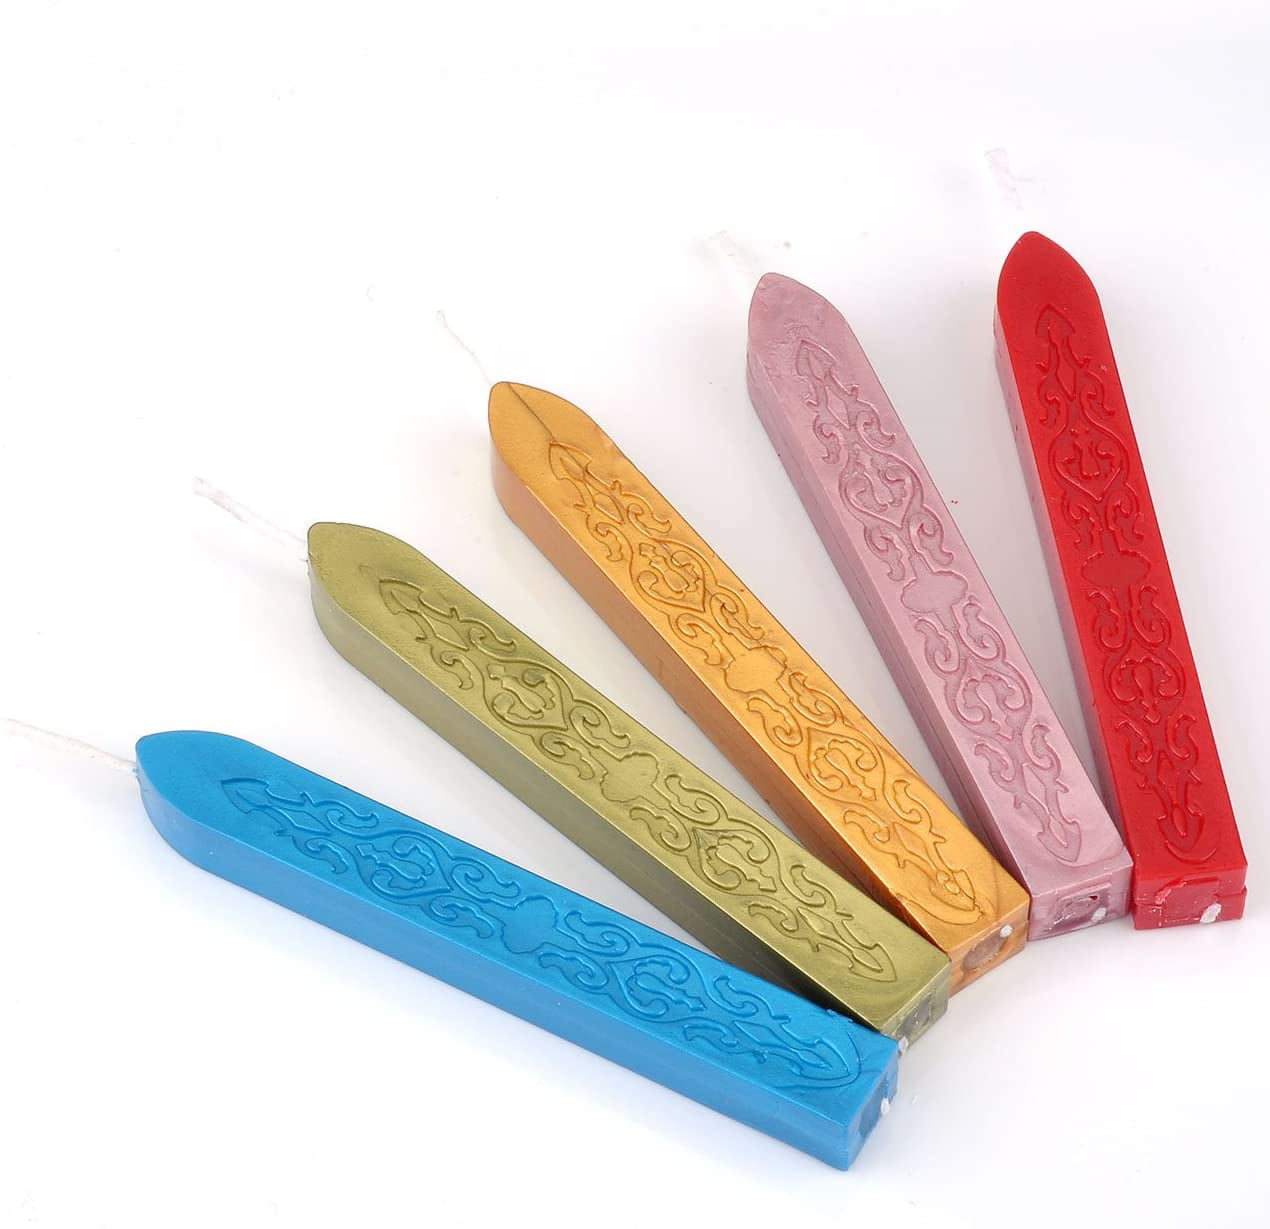 Manuscript Sealing Seal Wax Sticks With Wicks Red Silver Cooper Gold Colors 